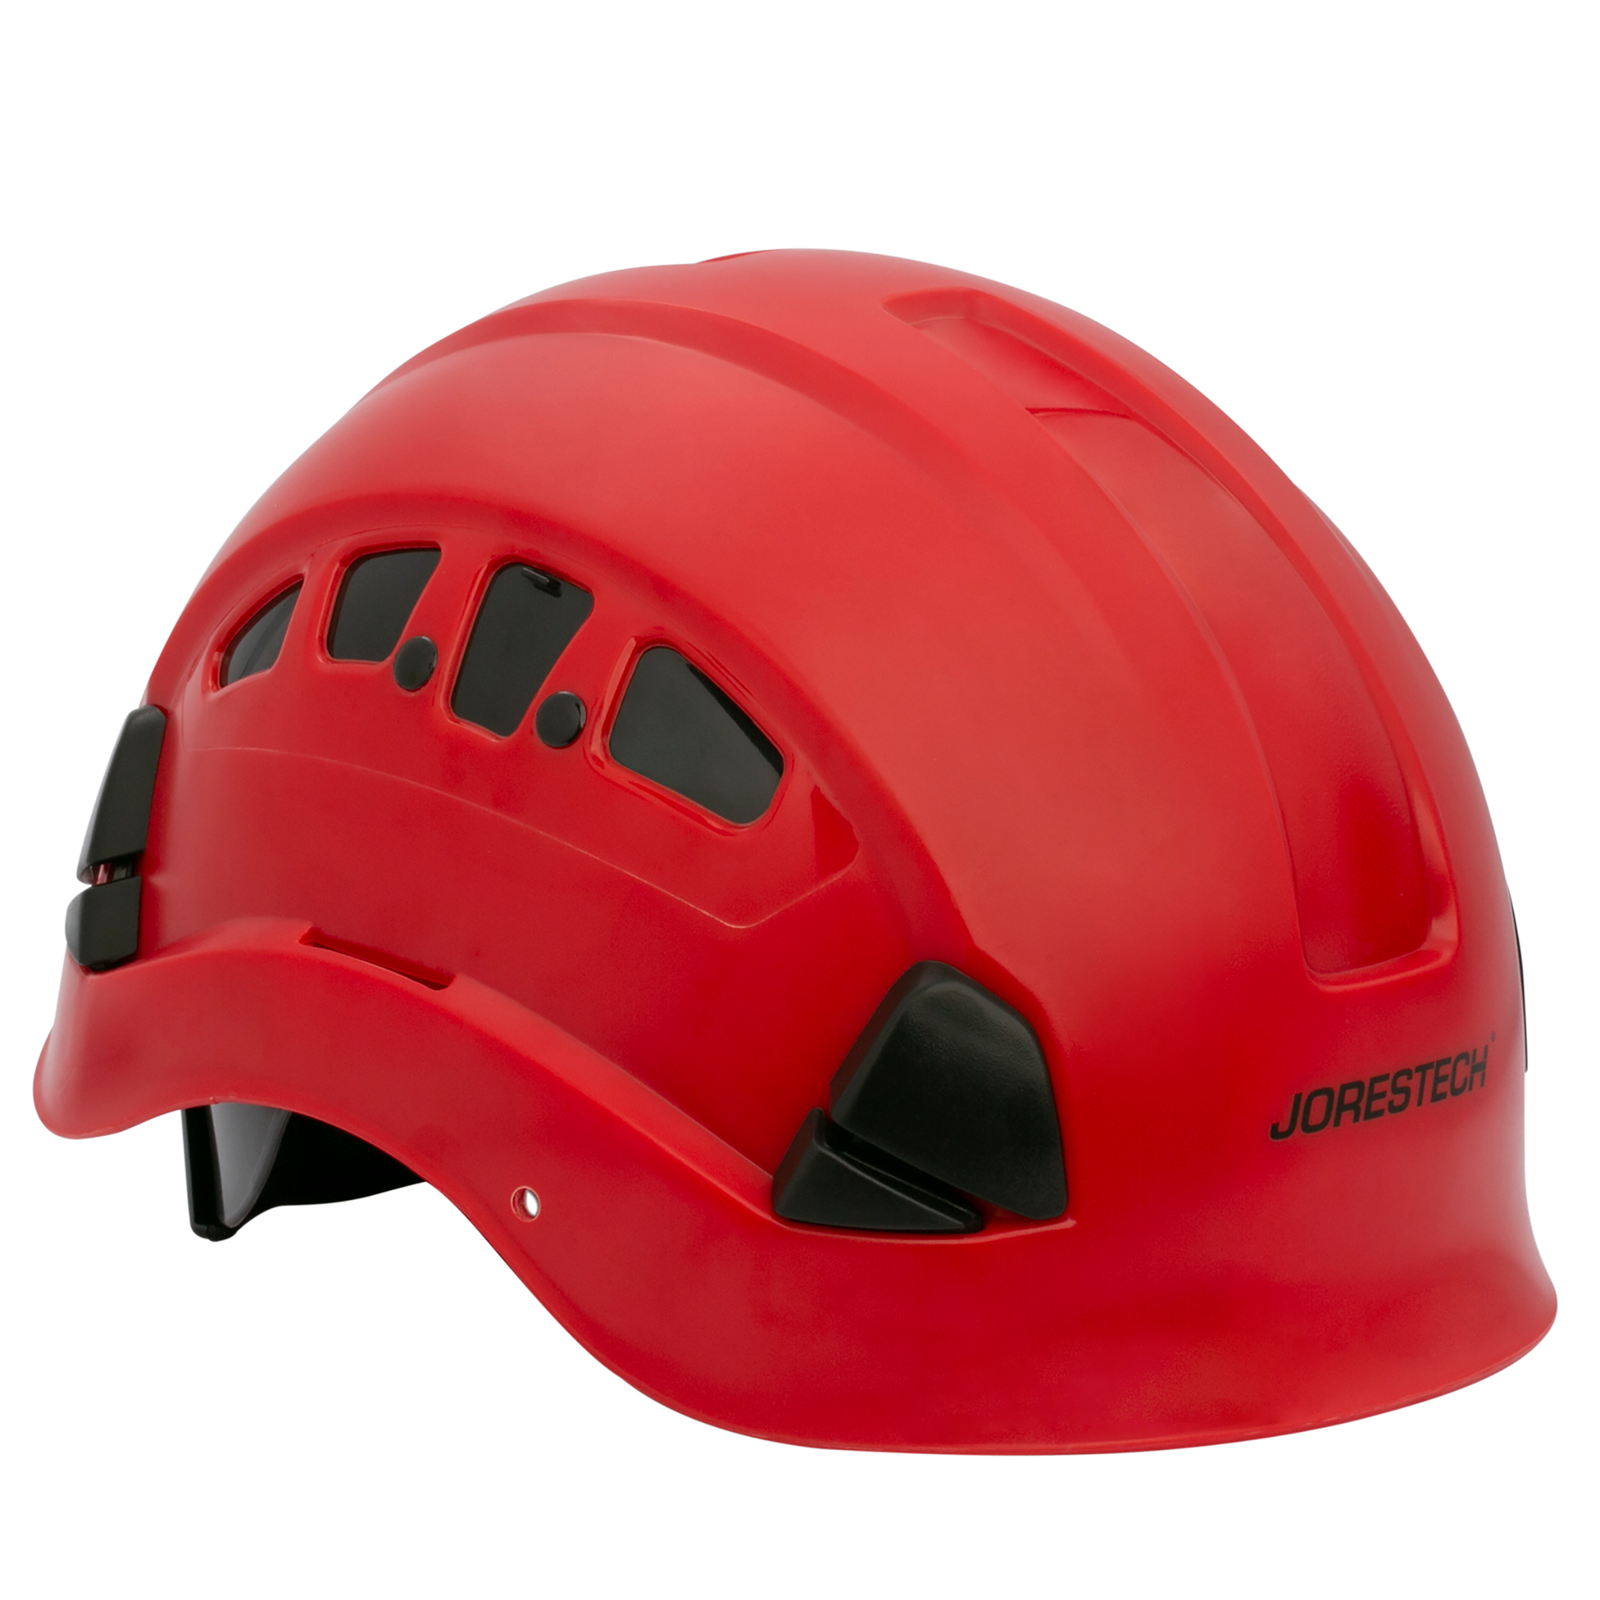 Diagonal view of the Jorestech red ventilated rescue hard hat with adjustable 6 point suspension